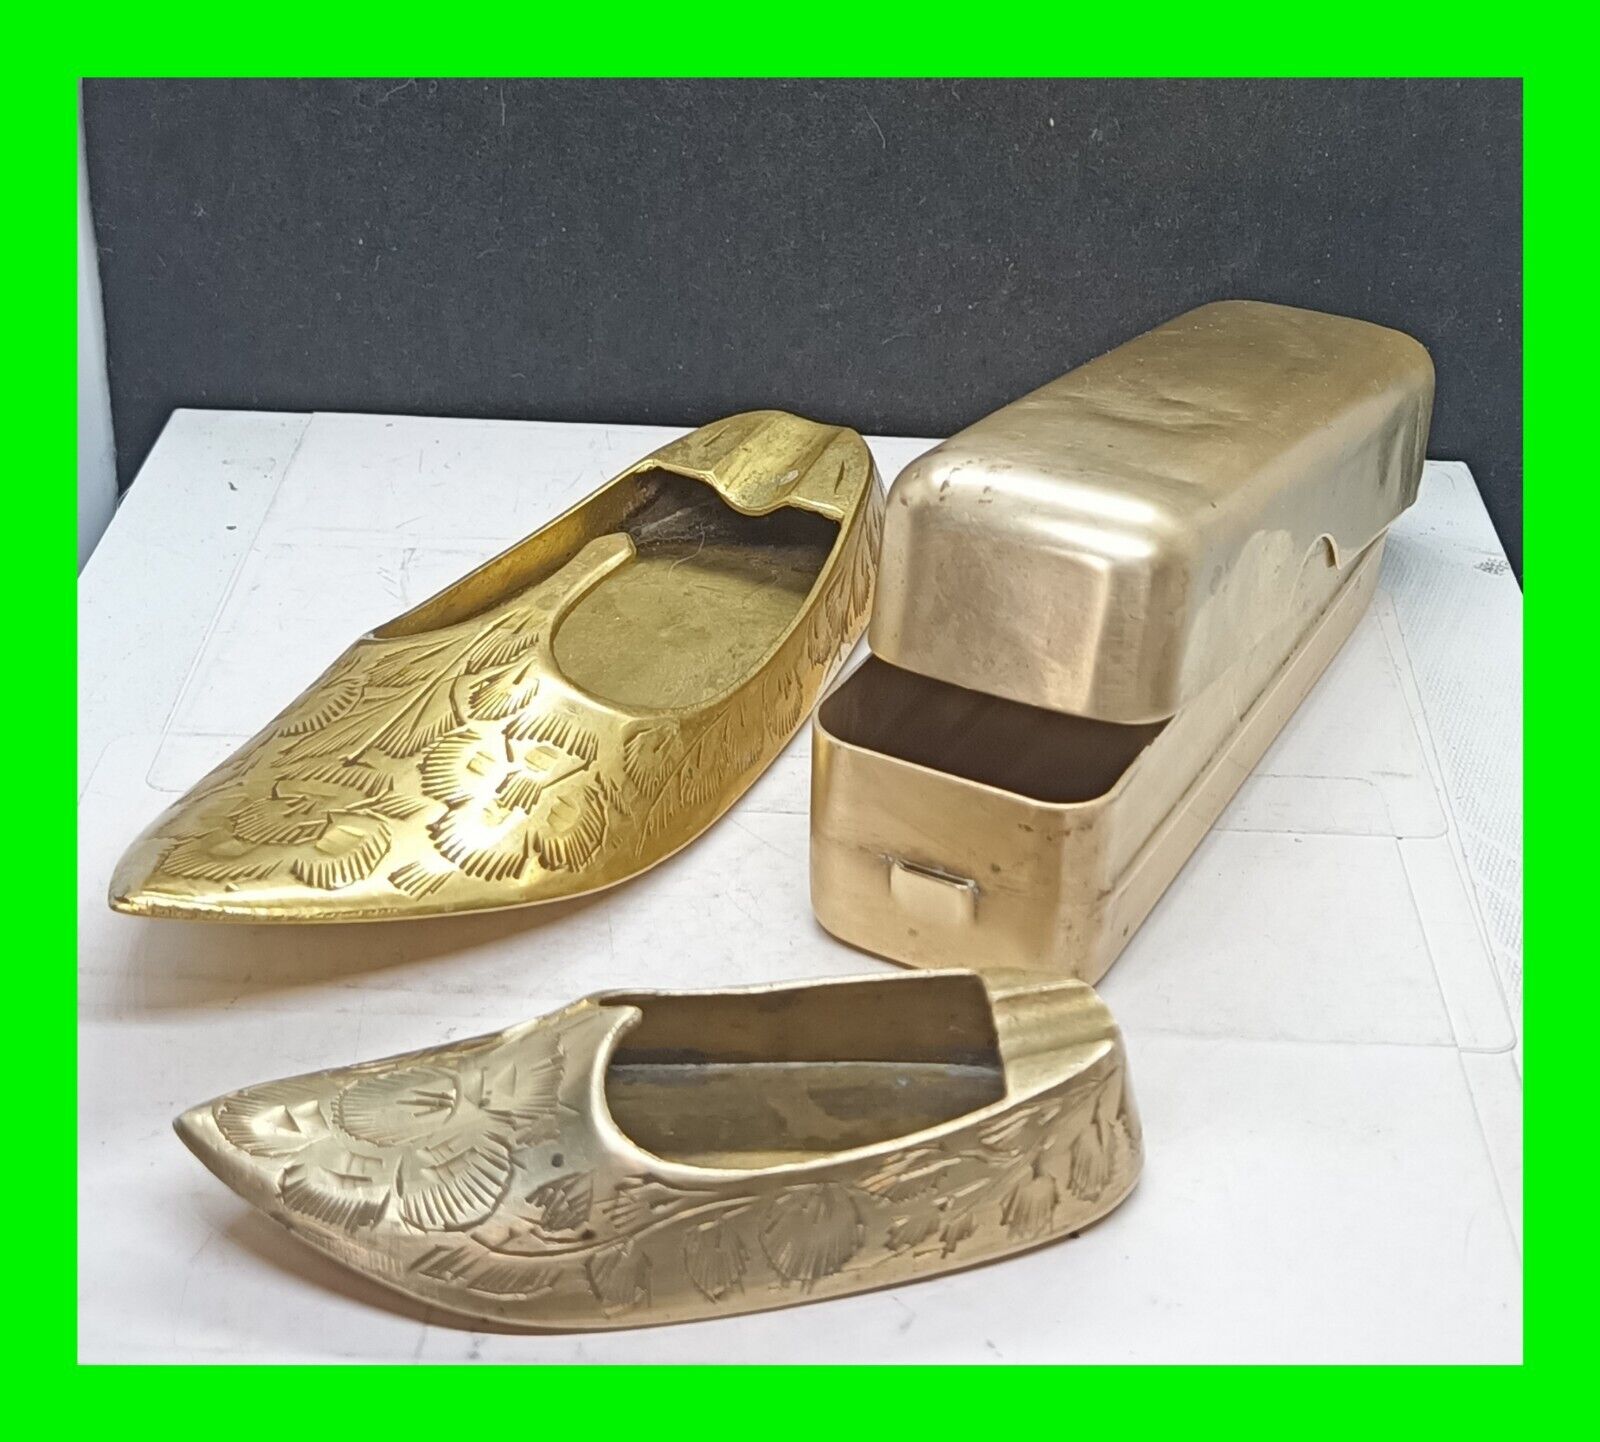 2x Vintage Etched Brass Genie Shoes & A Small Brass Box ~ Ashtray Incense Burner